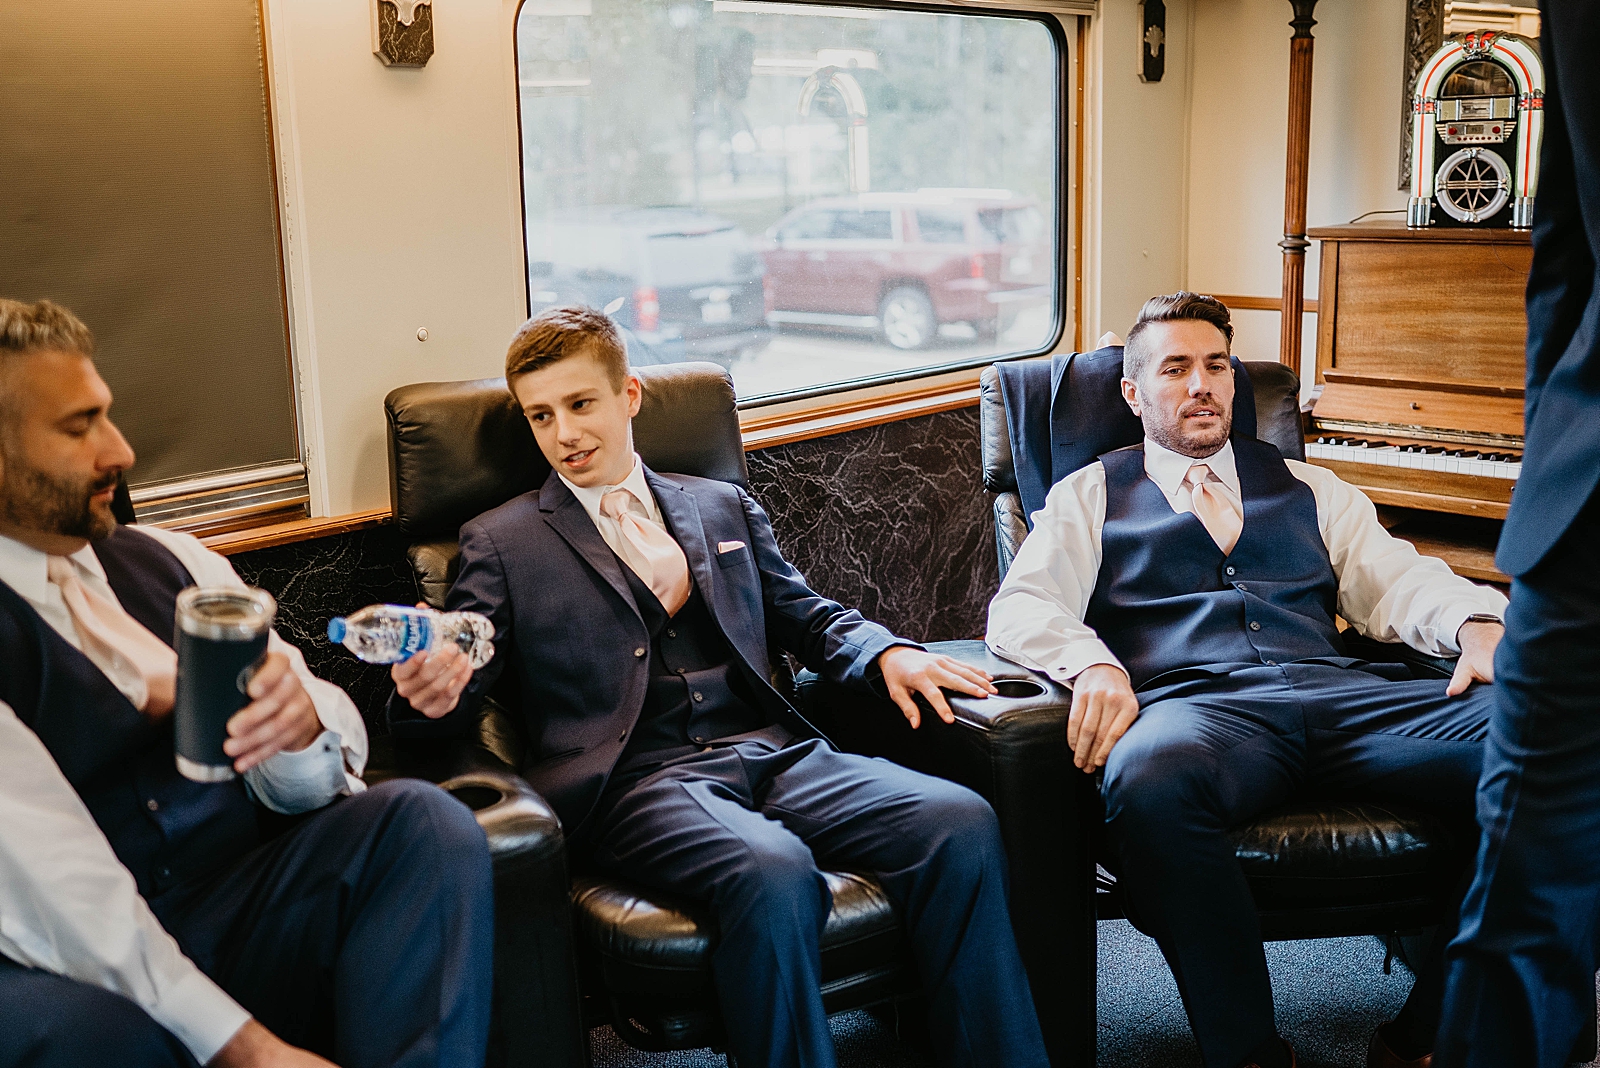 Groomsmen and wedding party chilling and relaxing before ceremony